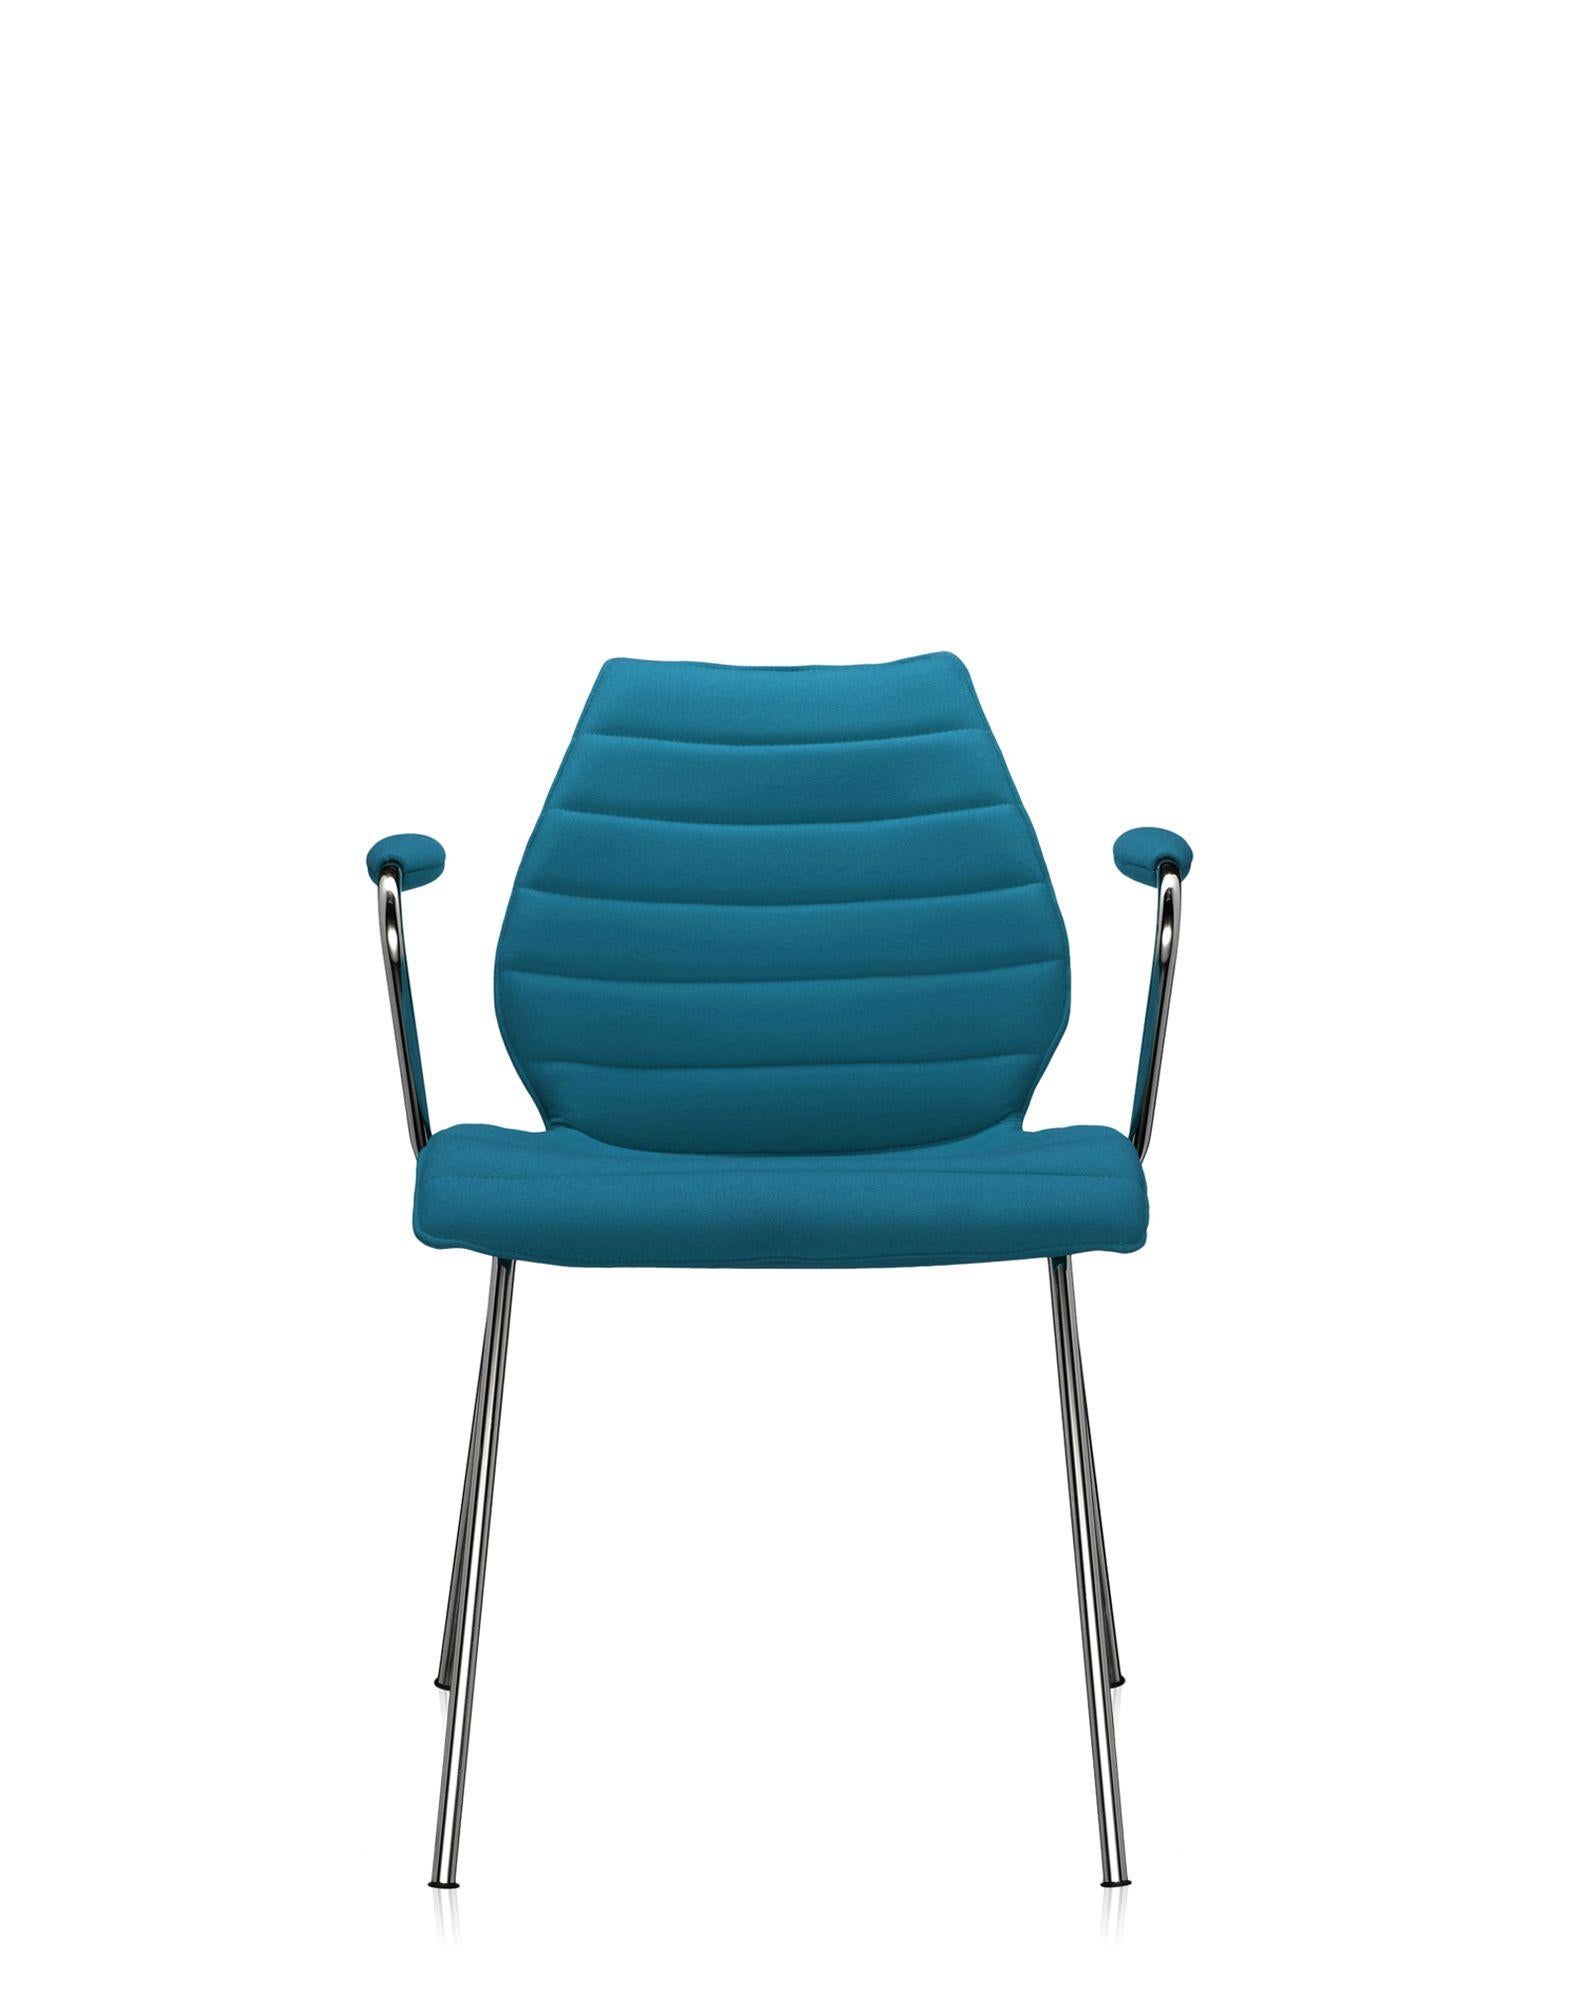 Italian Set of 2 Kartell Maui Soft Trevira Chair in Teal by Vico Magistretti